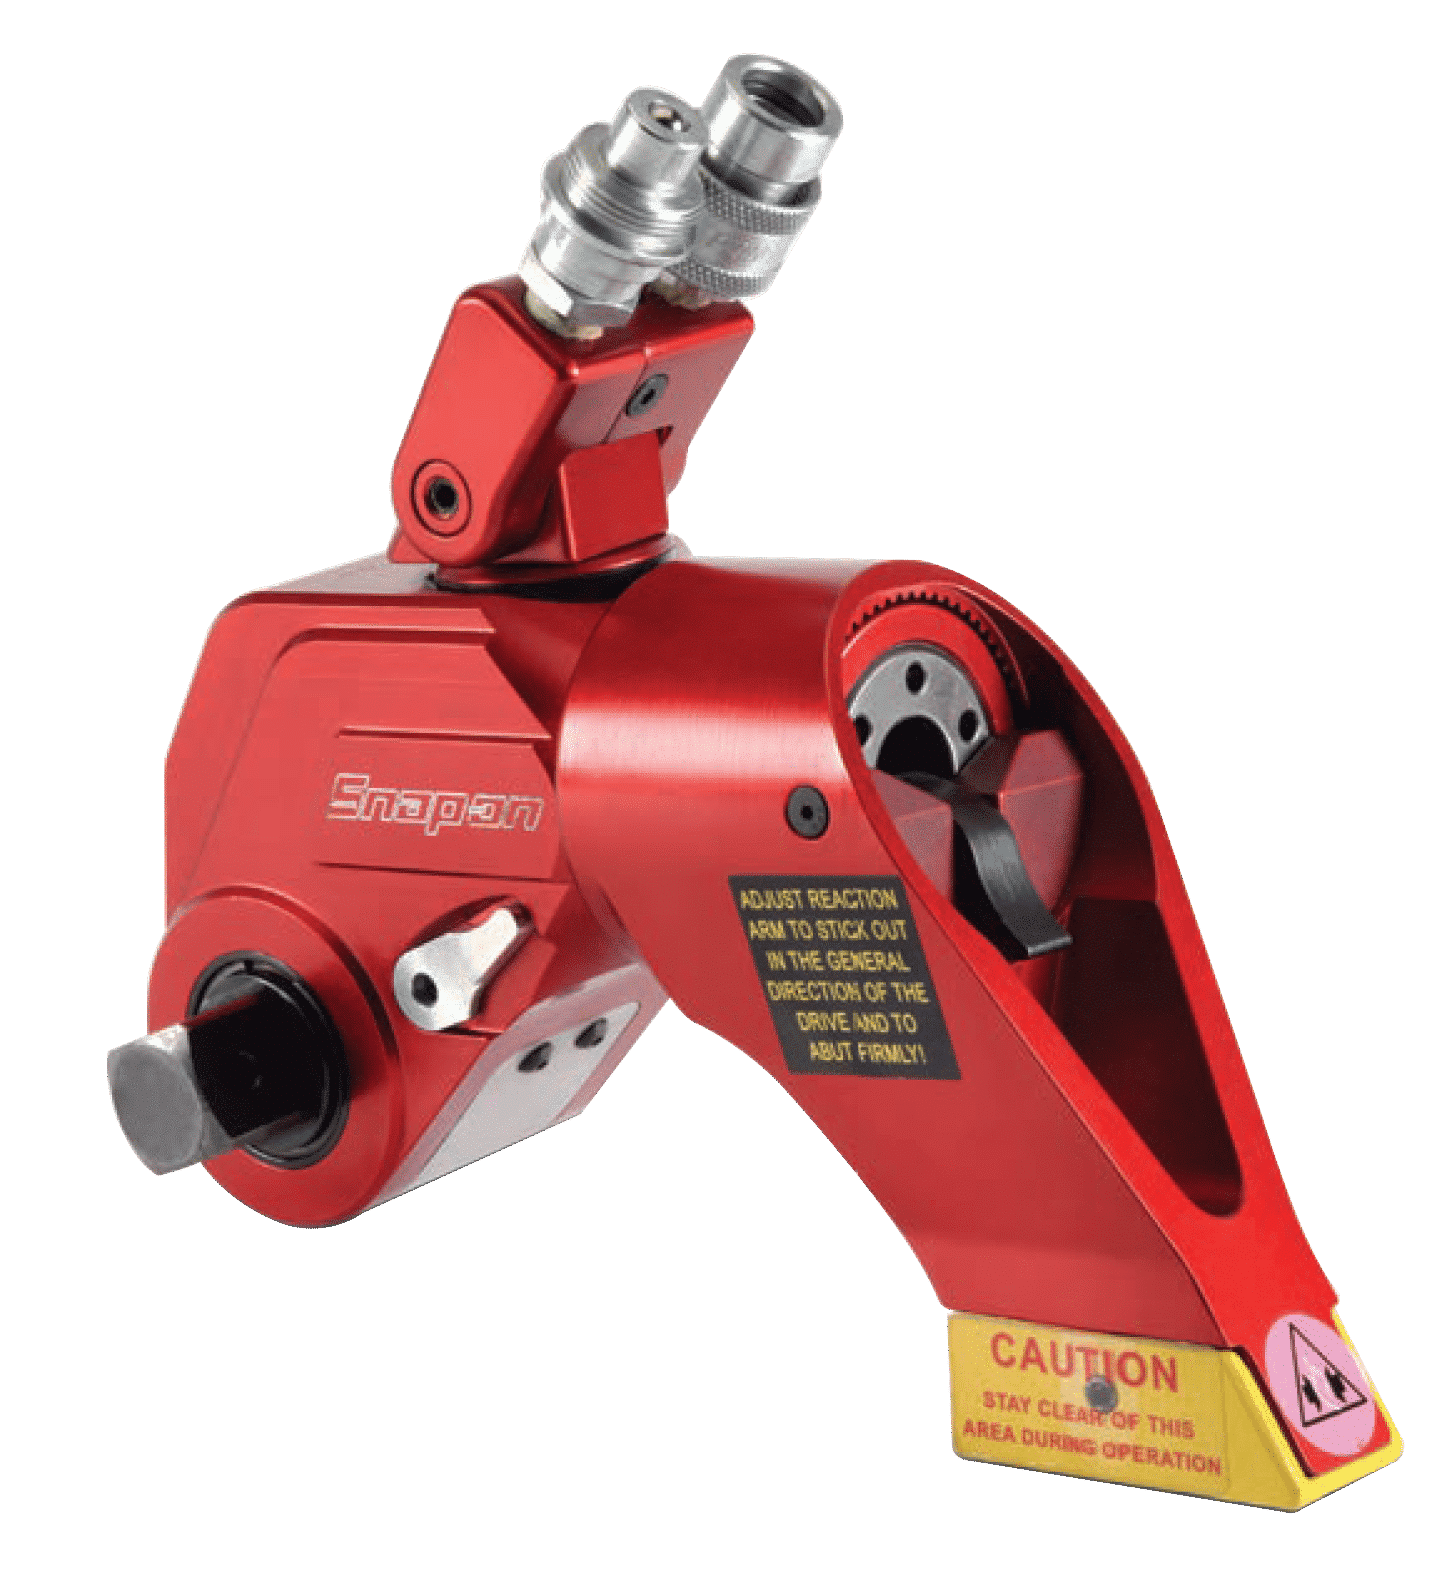 Snap-on Hydraulic Torque Wrenches - HTQ35